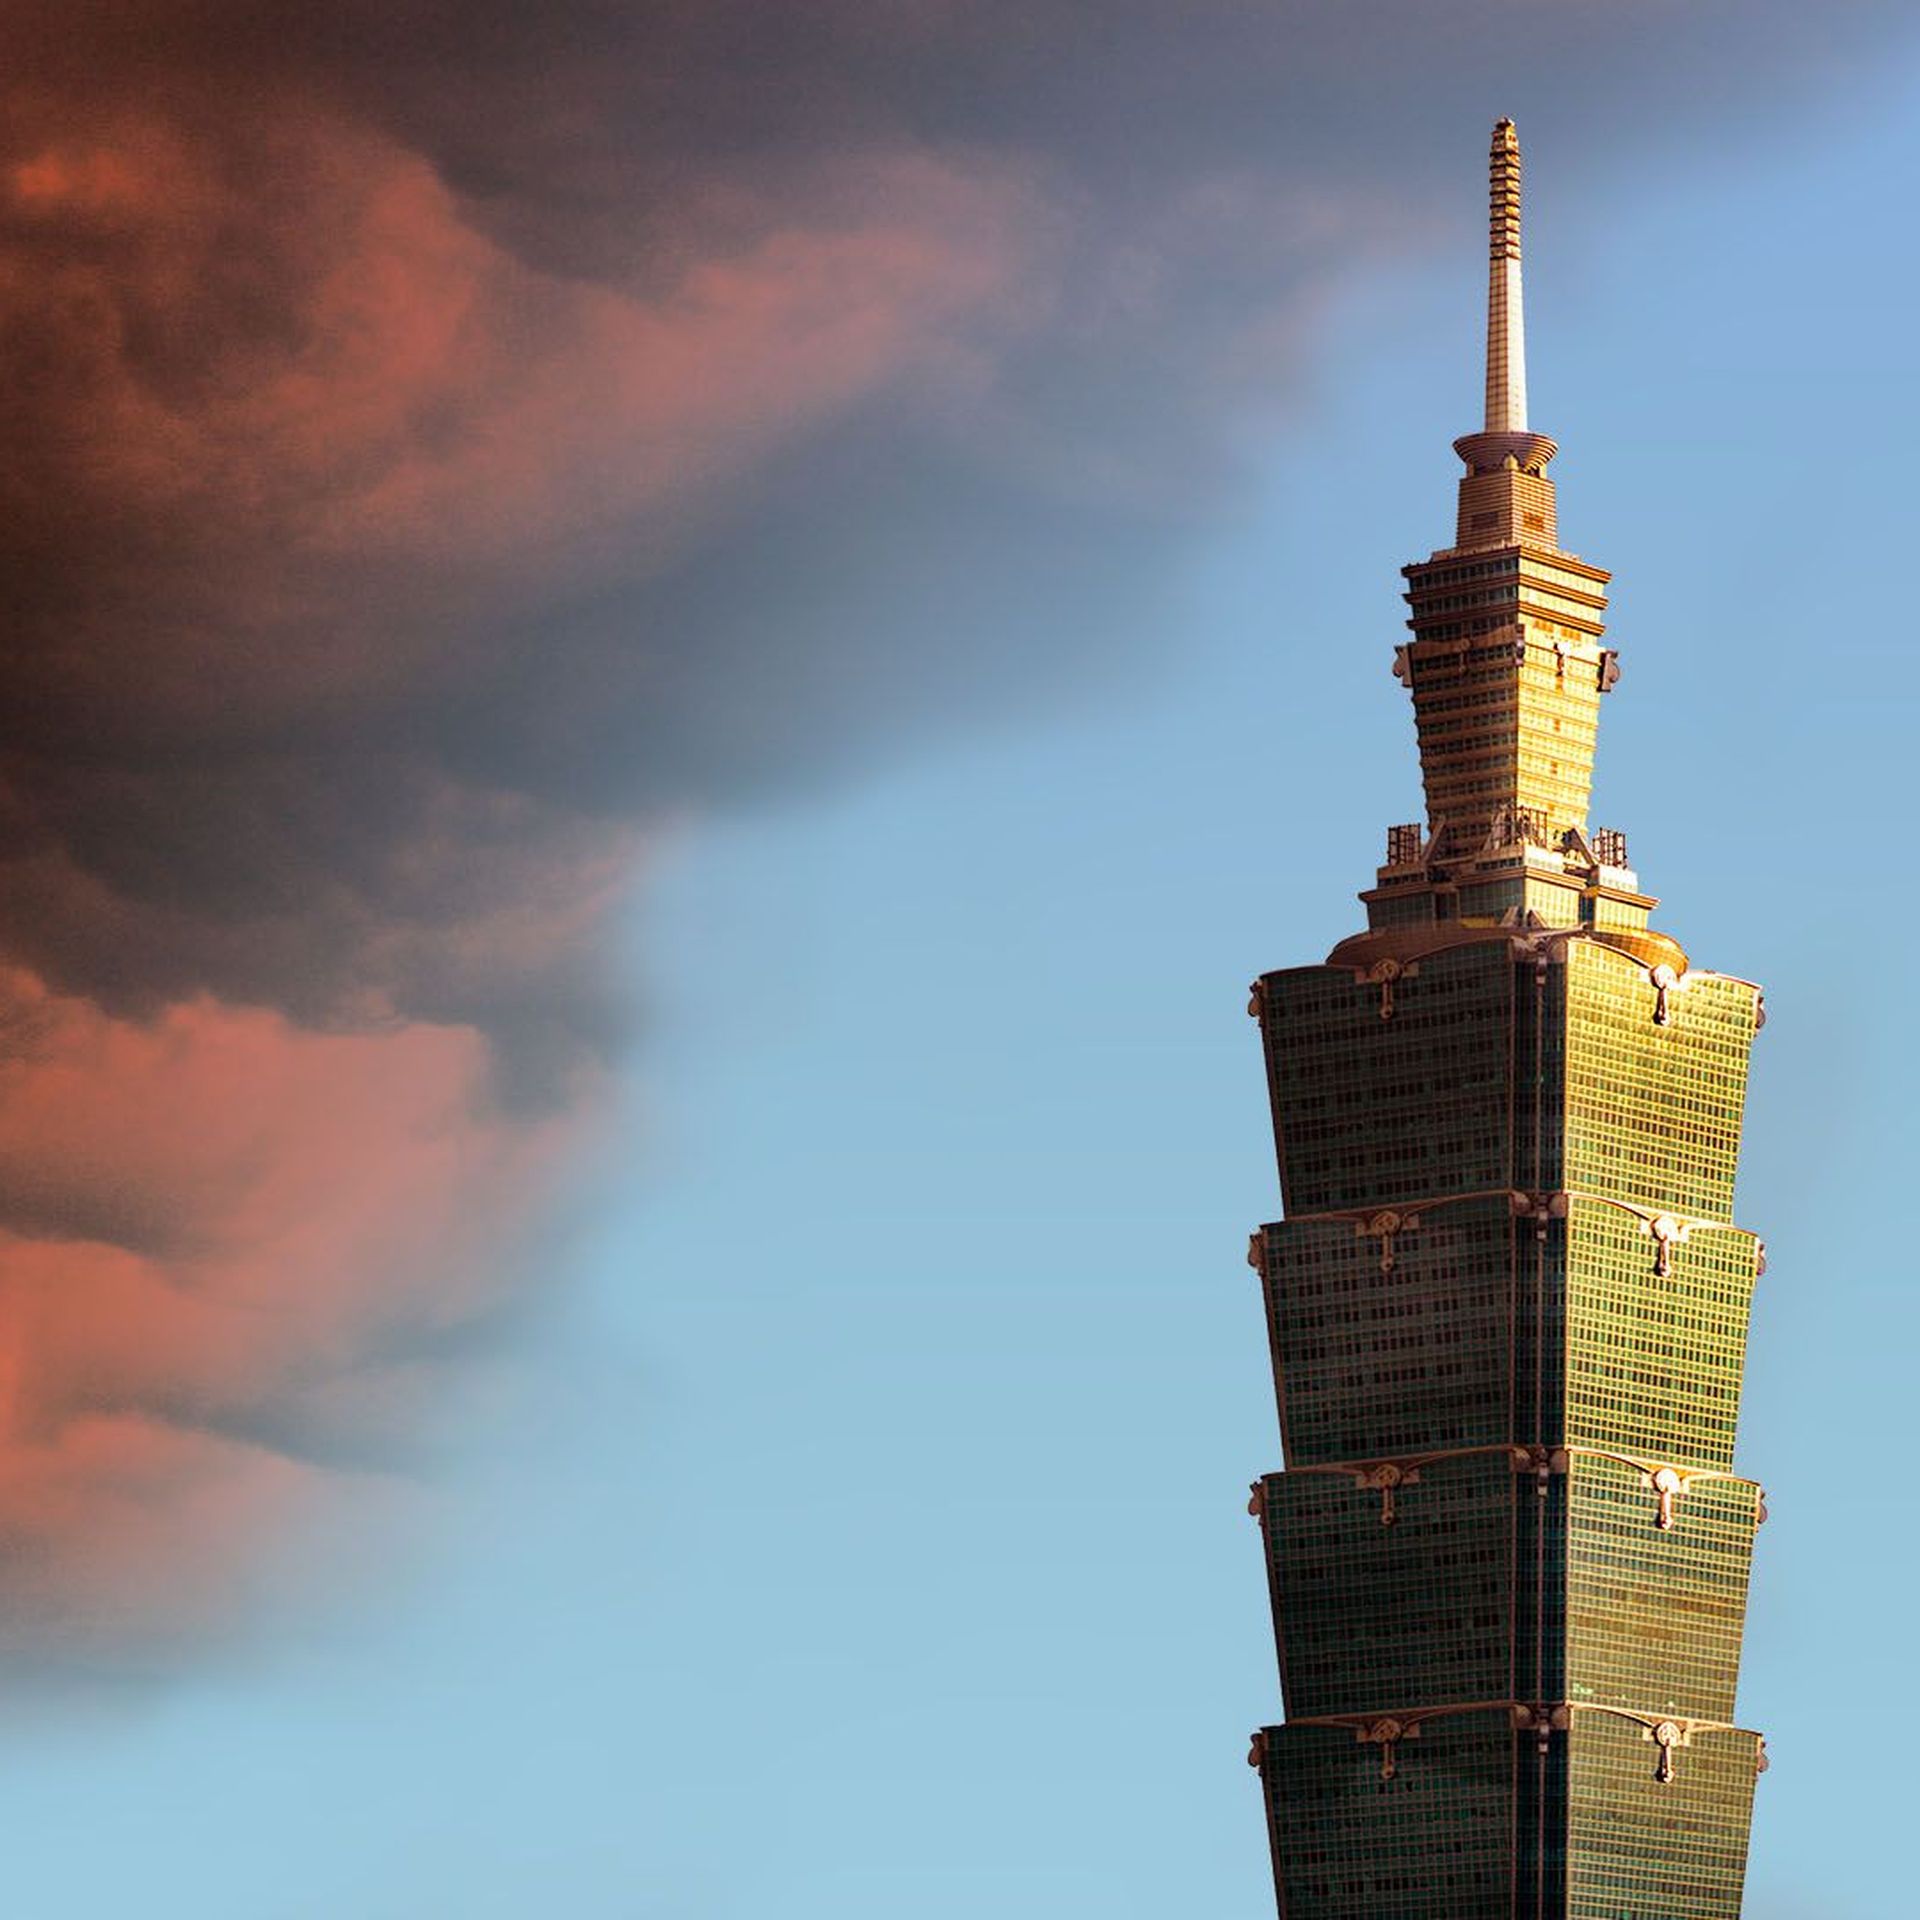 Illustration of the Taipei 101 building with a dark red cloud resembling the Chinese flag approaching